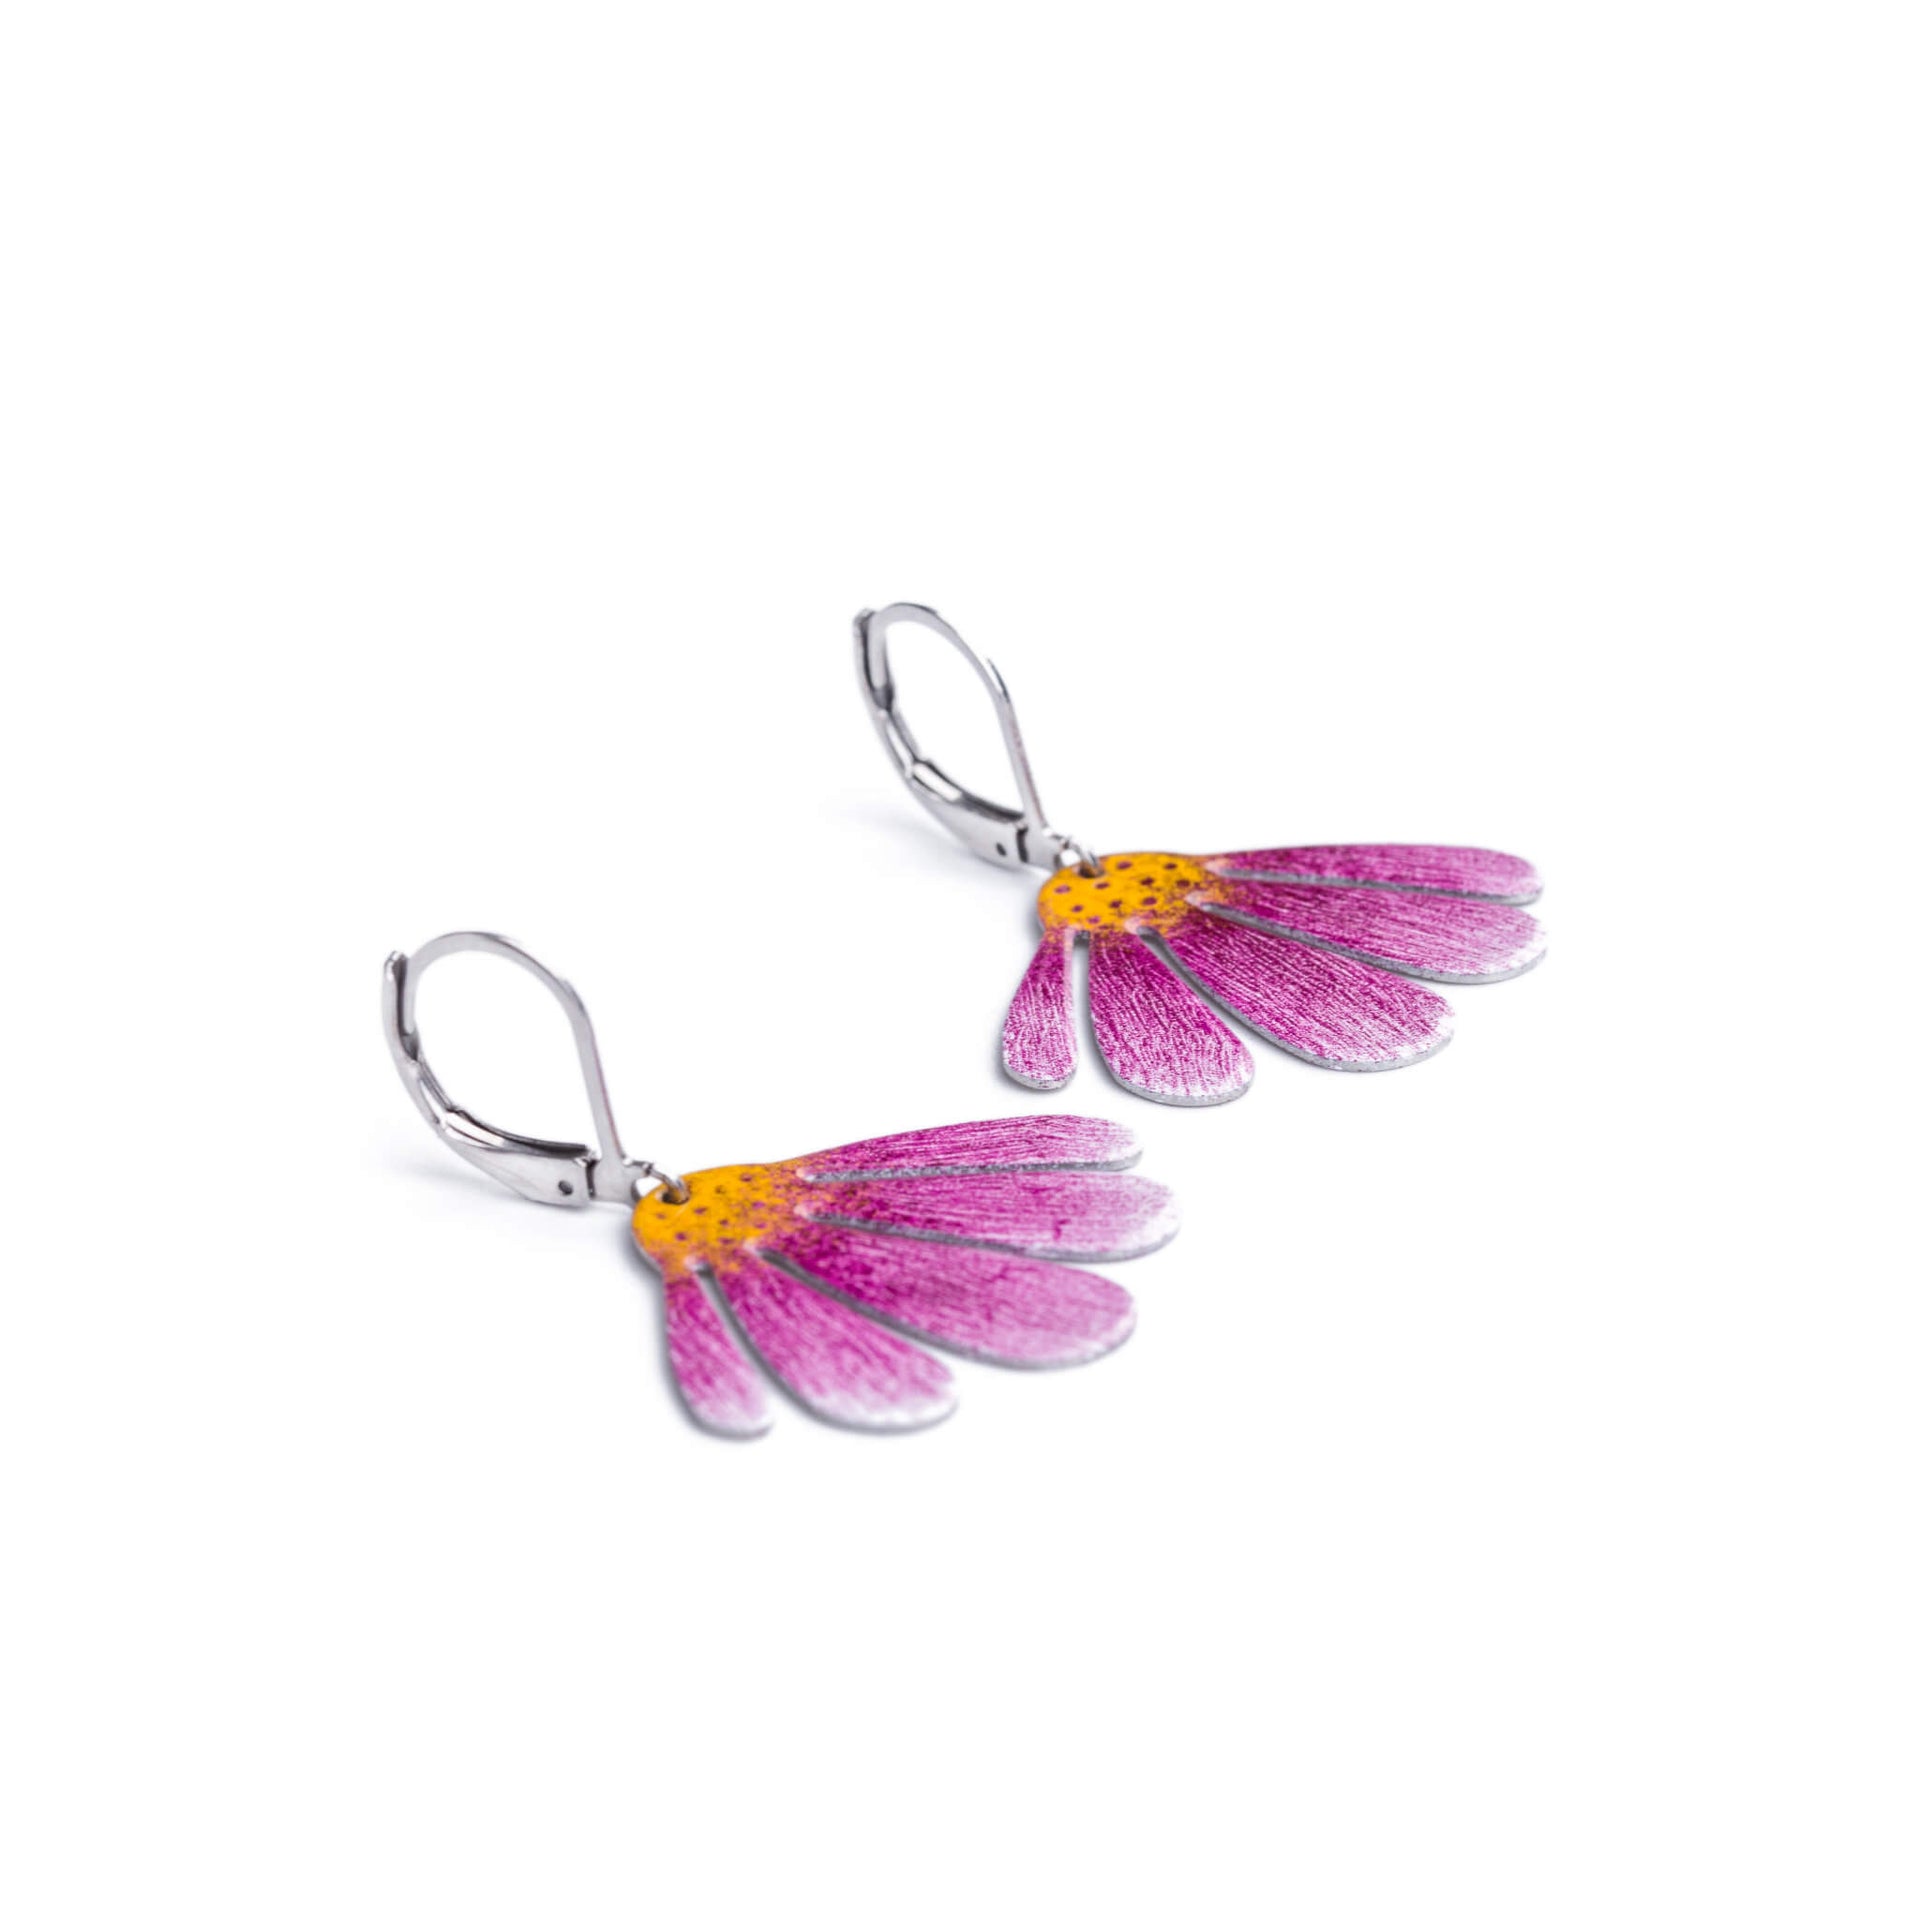 pink and purple echinacea earrings by PARADA Jewelry - a view from the side